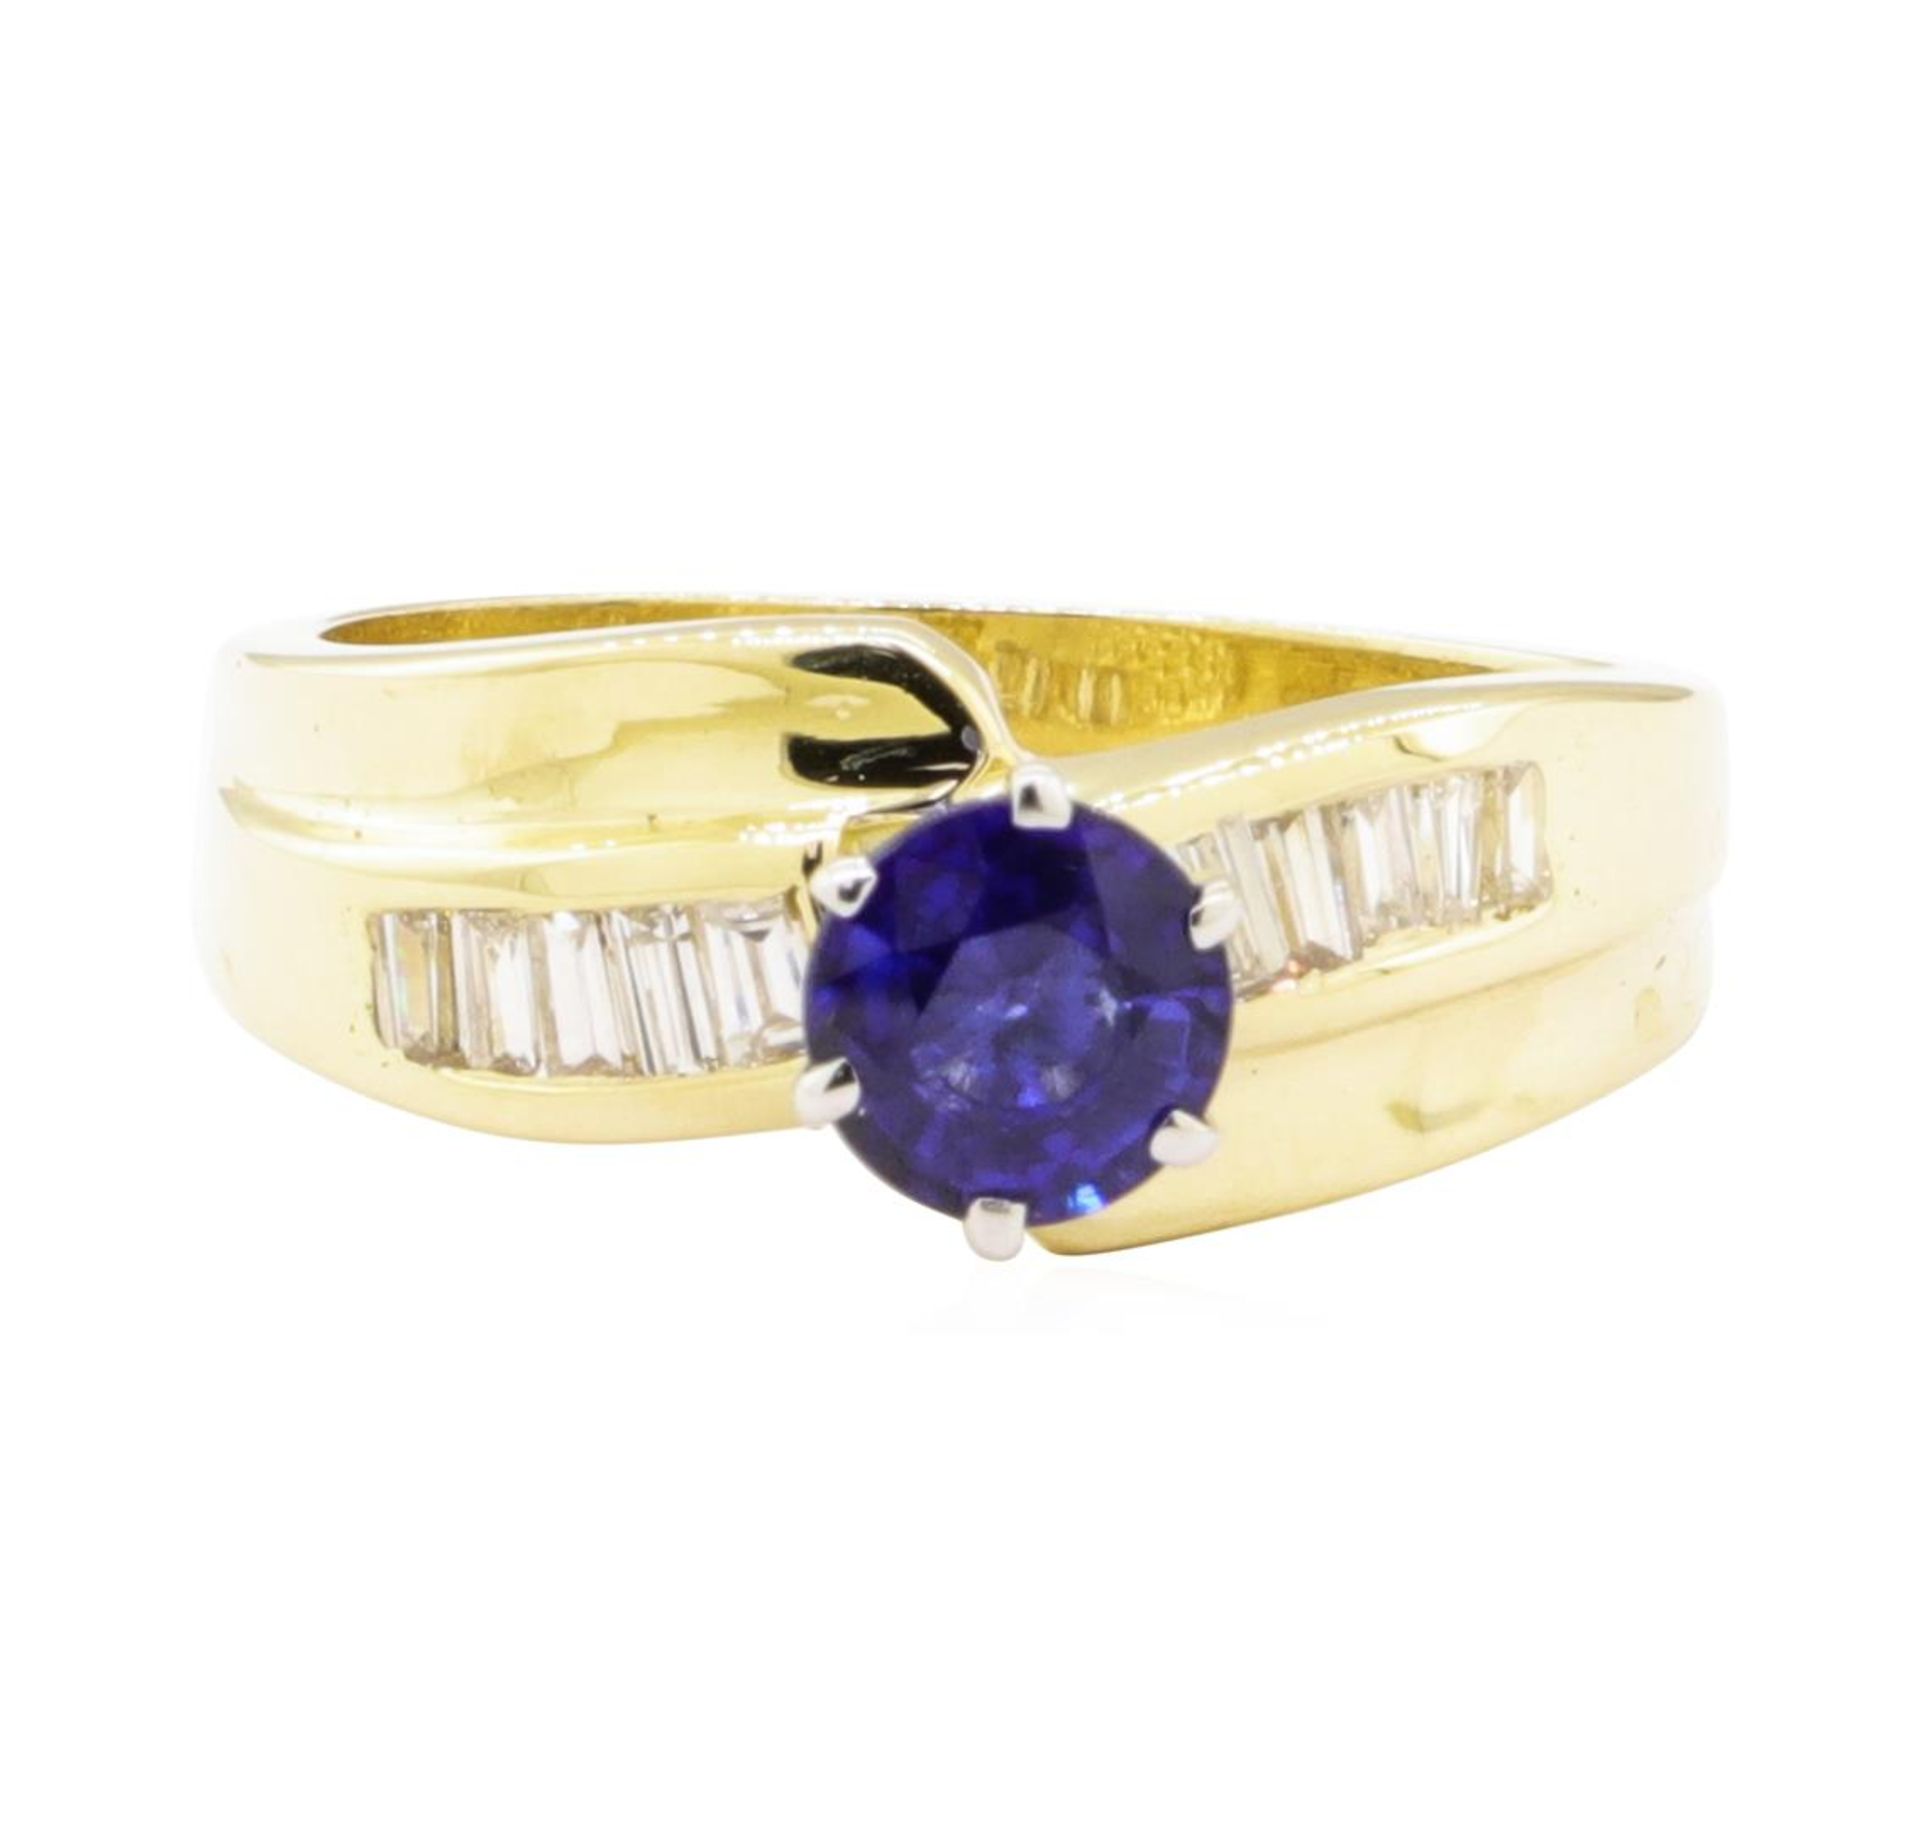 1.32ctw Blue Sapphire and Diamond Ring - 14KT Yellow Gold - Image 2 of 4